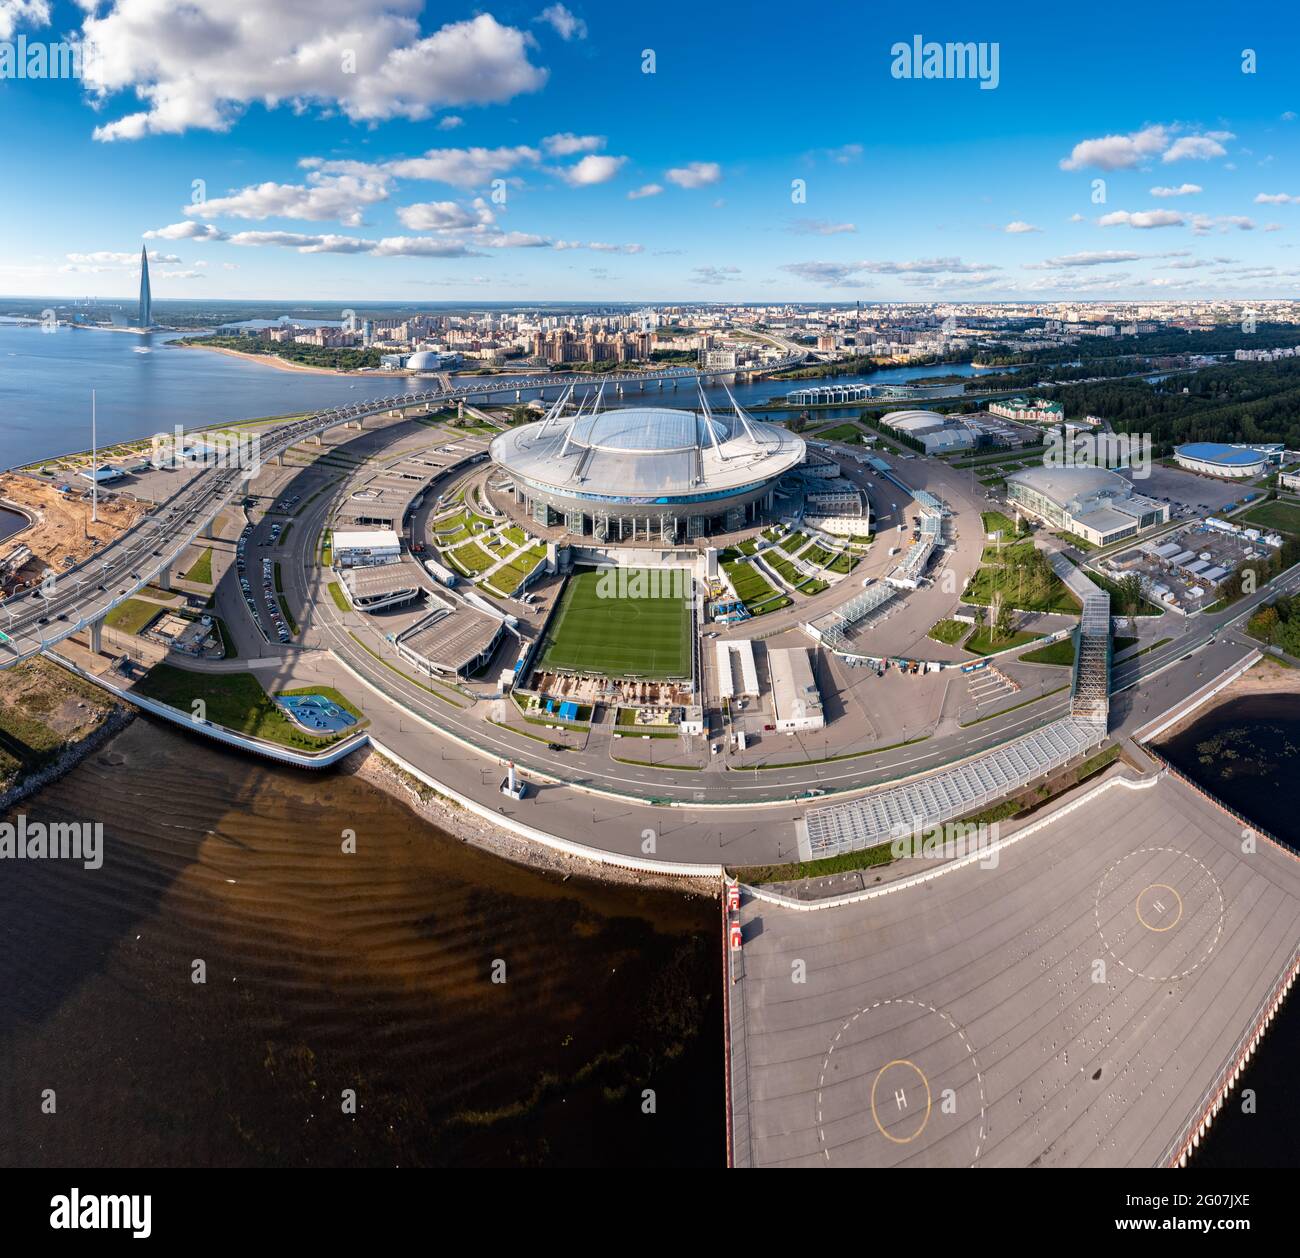 Russia, St.Petersburg, 01 September 2020: Drone point of view of new stadium Gazprom Arena, Euro 2020, retractable soccer field, skyscraper Lakhta Stock Photo